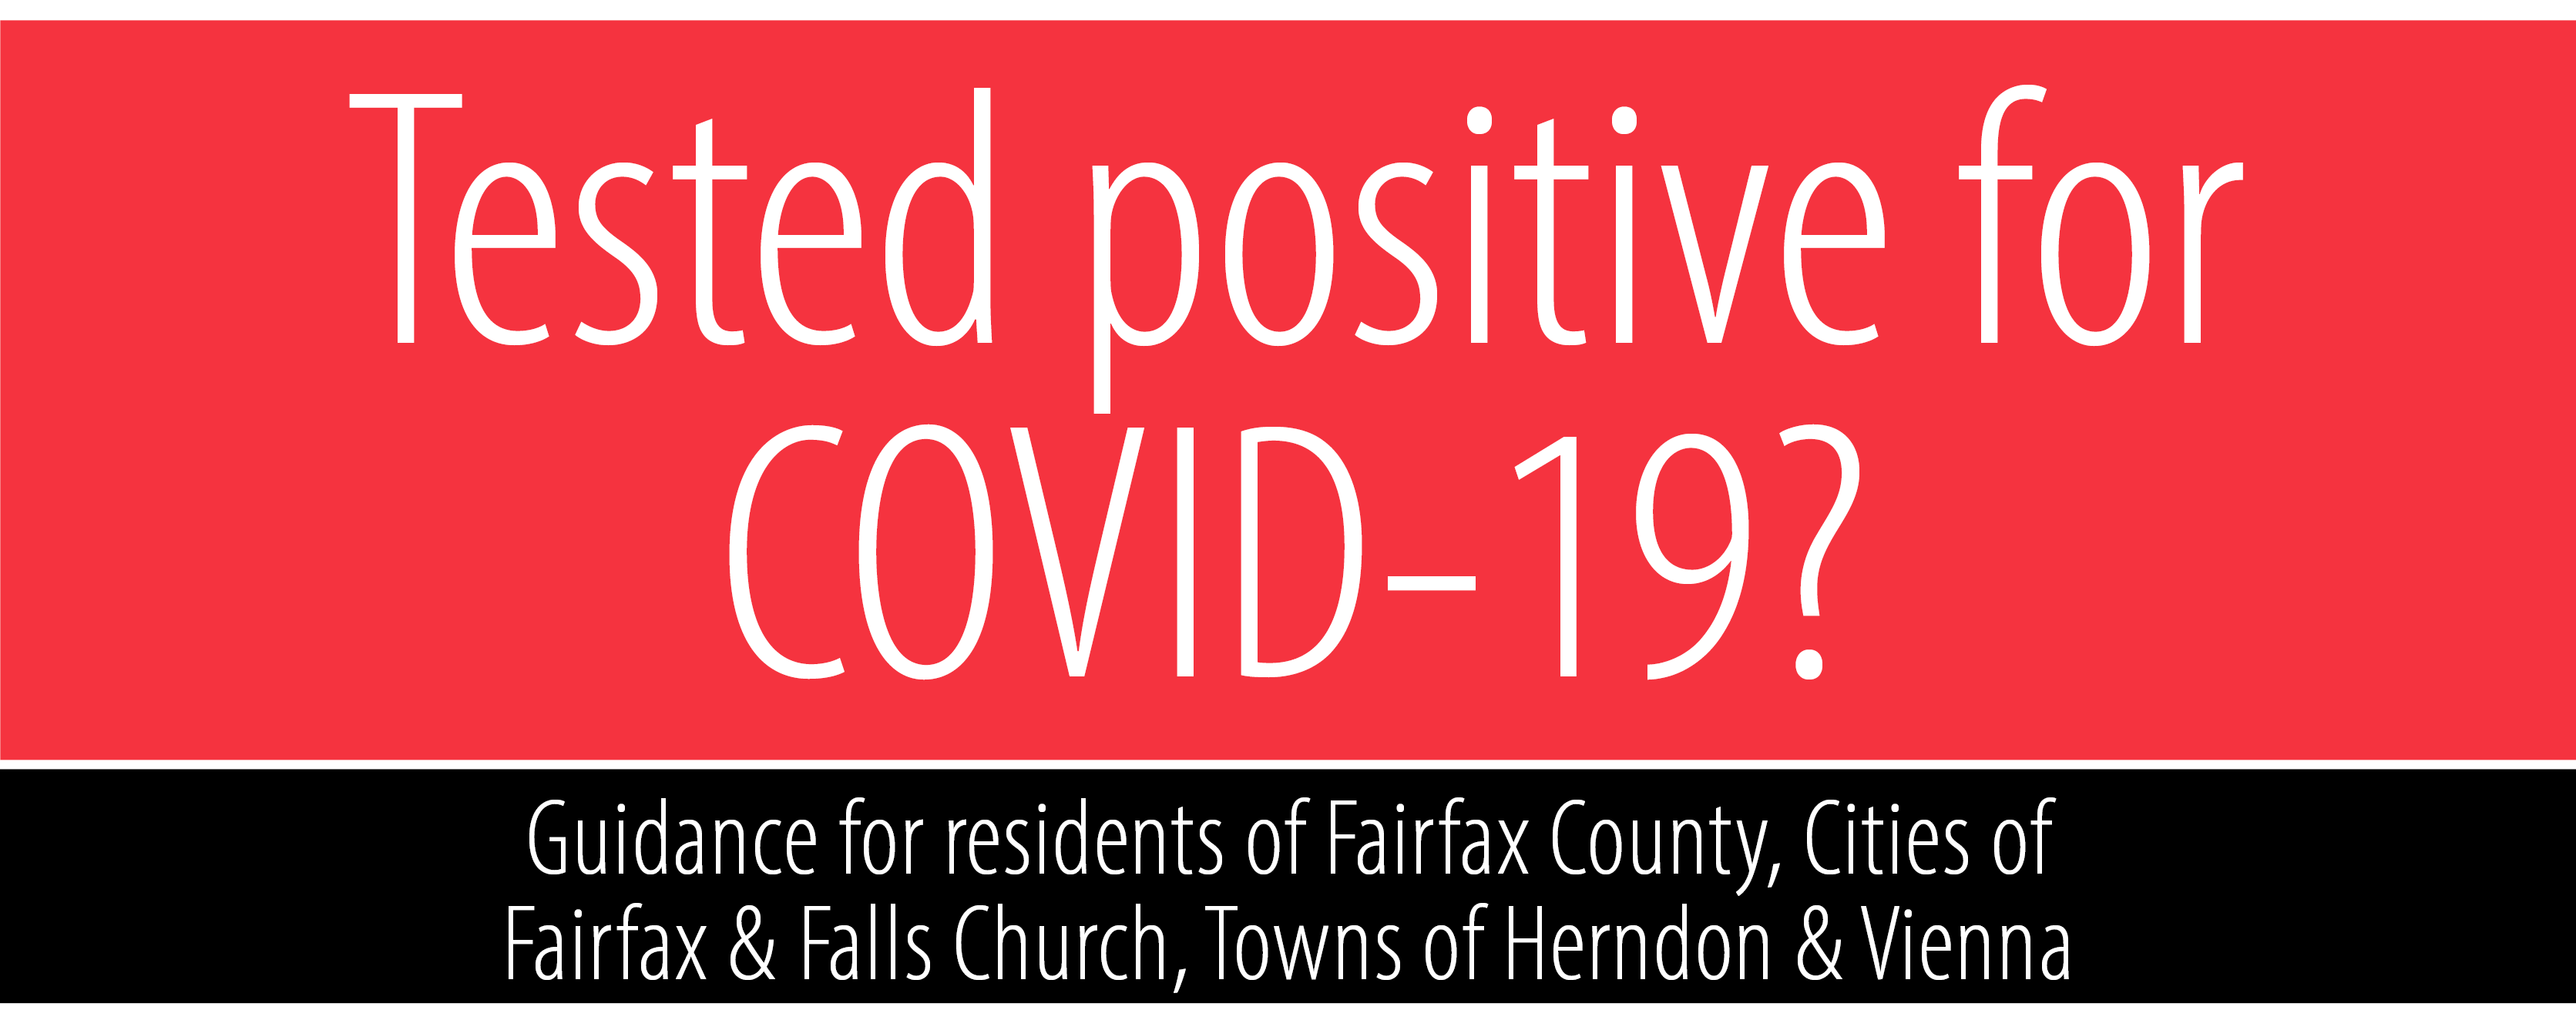 Red box with white text saying "Tested positive for COVID-19?" above a black box with white text saying "Guidance for residents of Fairfax County, Cities of Fairfax & Falls Church, Towns of Herndon & Vienna"